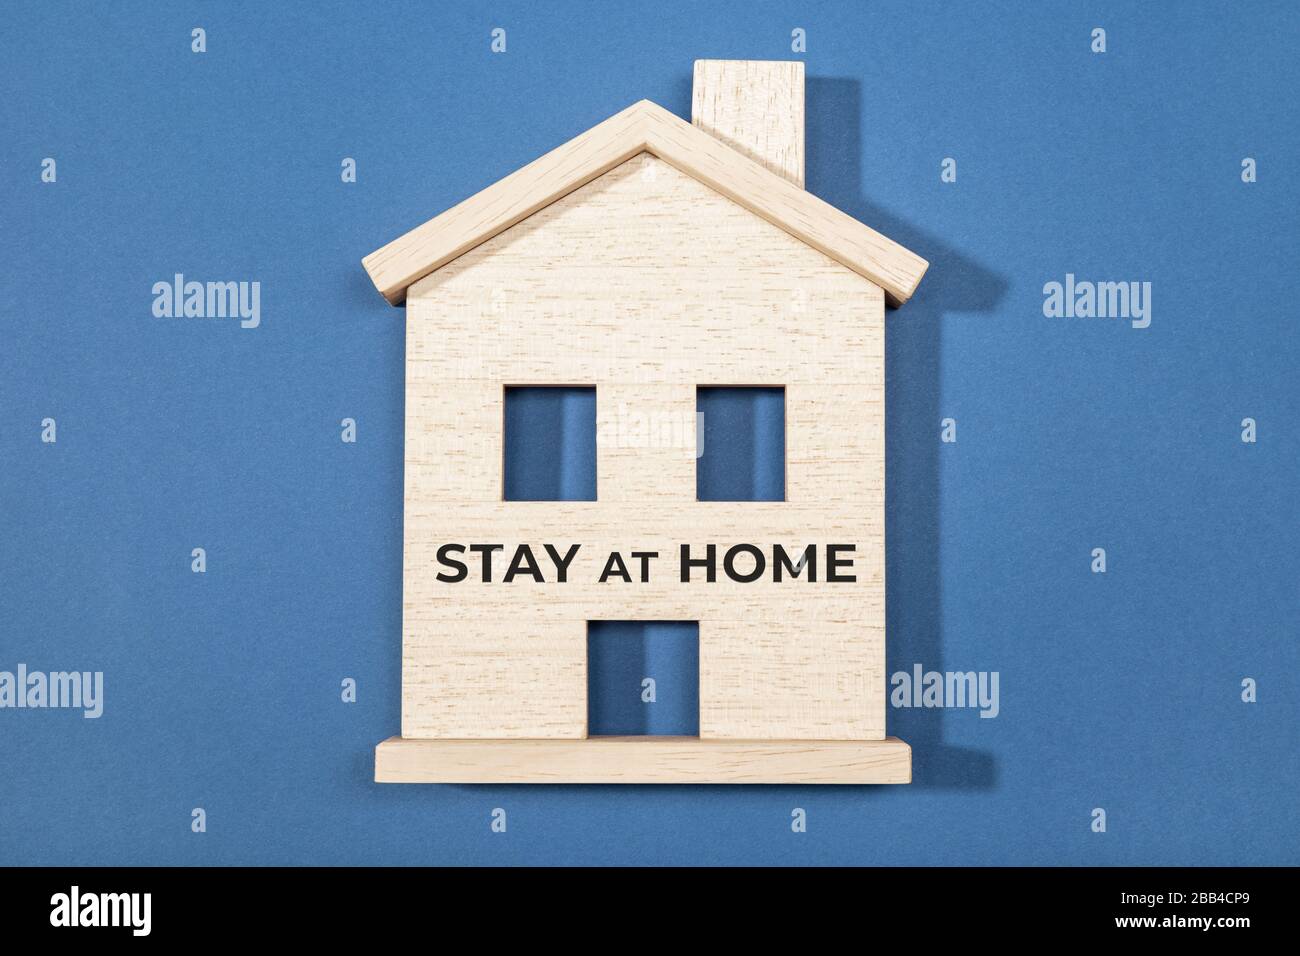 Stay at home concept. Wooden house icon isolated on blue background. Coronavirus outbreak advice Stock Photo